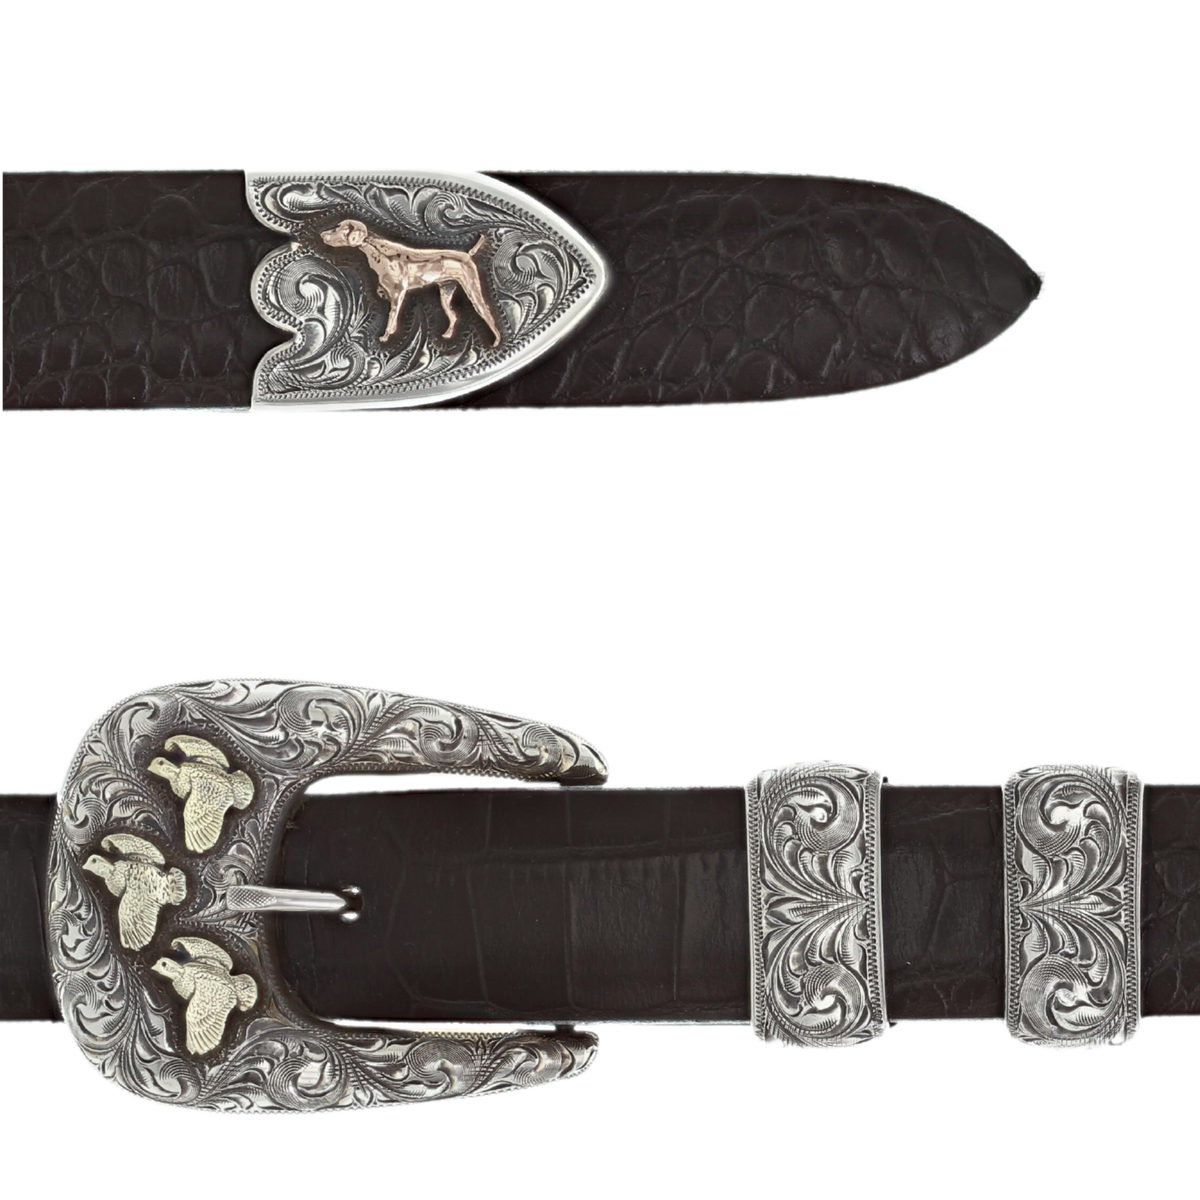 Fort Bend 1844 Quail and Pointer Buckle Set